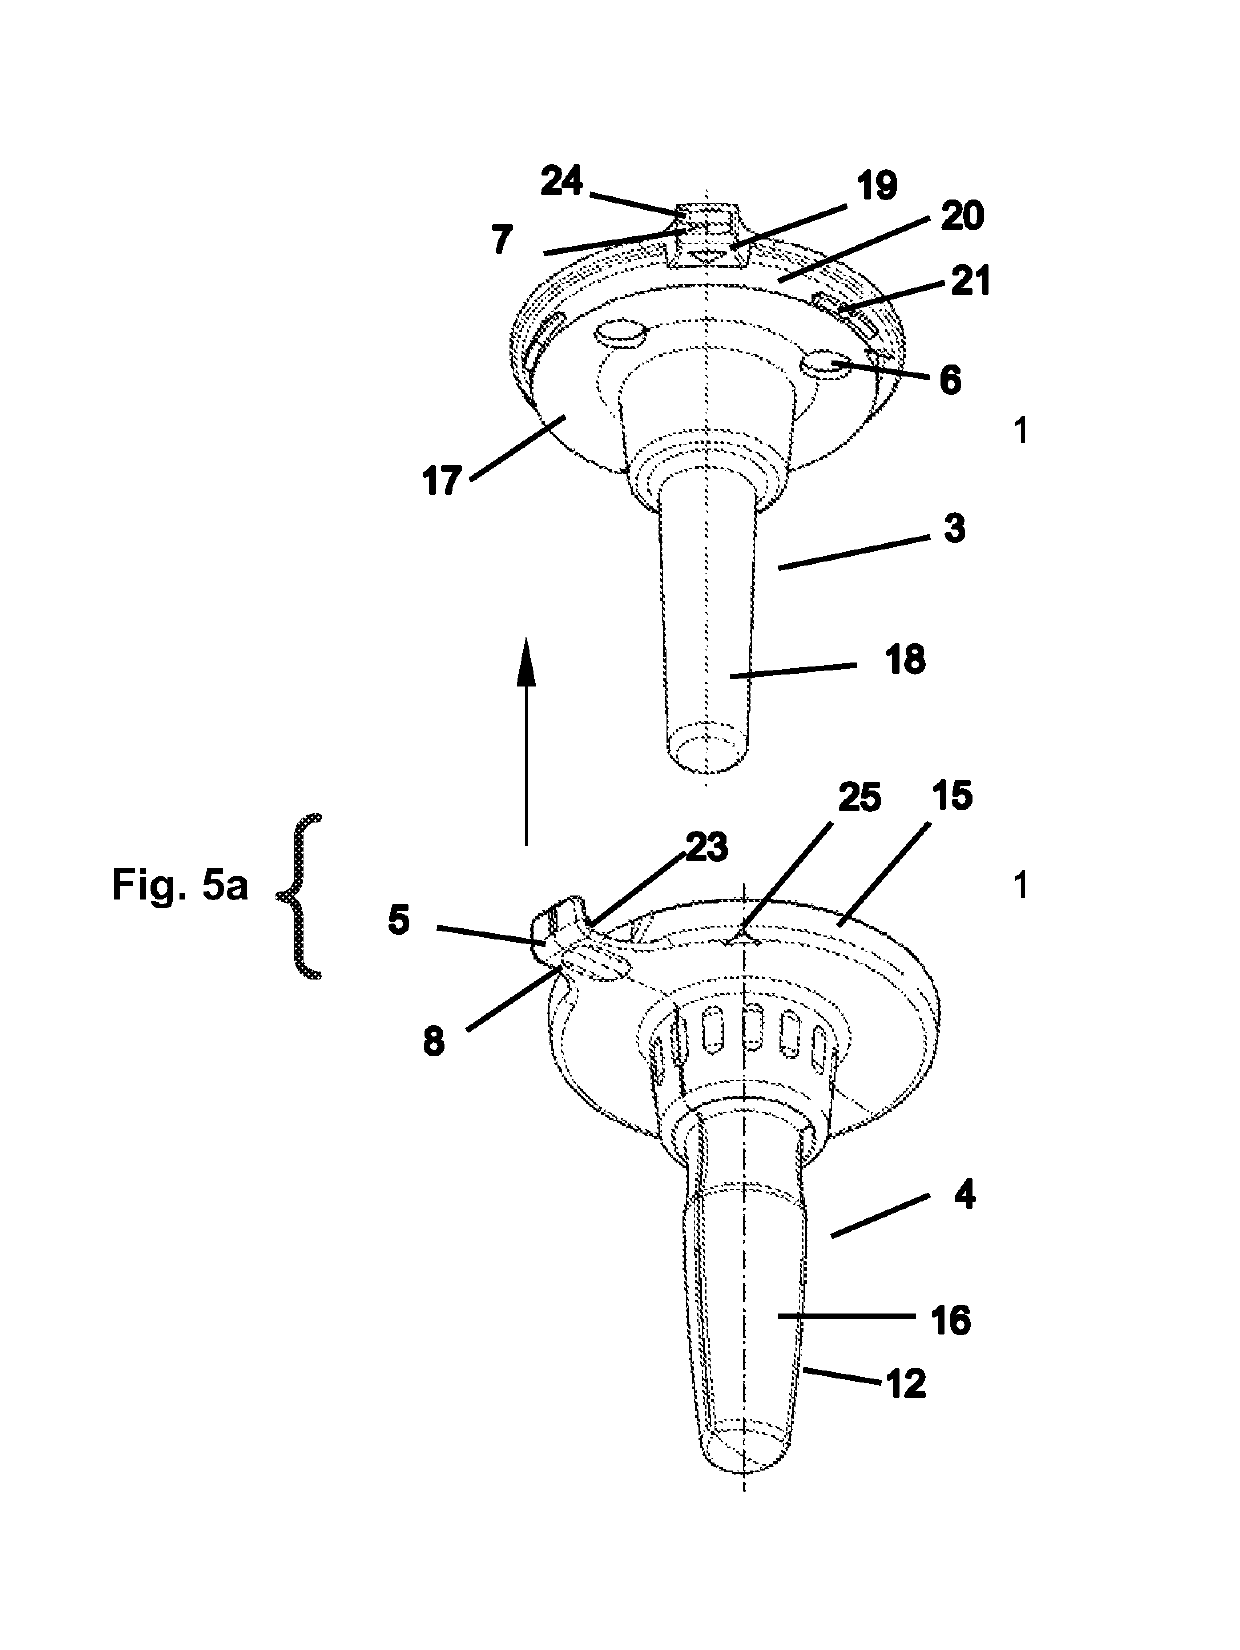 Grip for a medical device